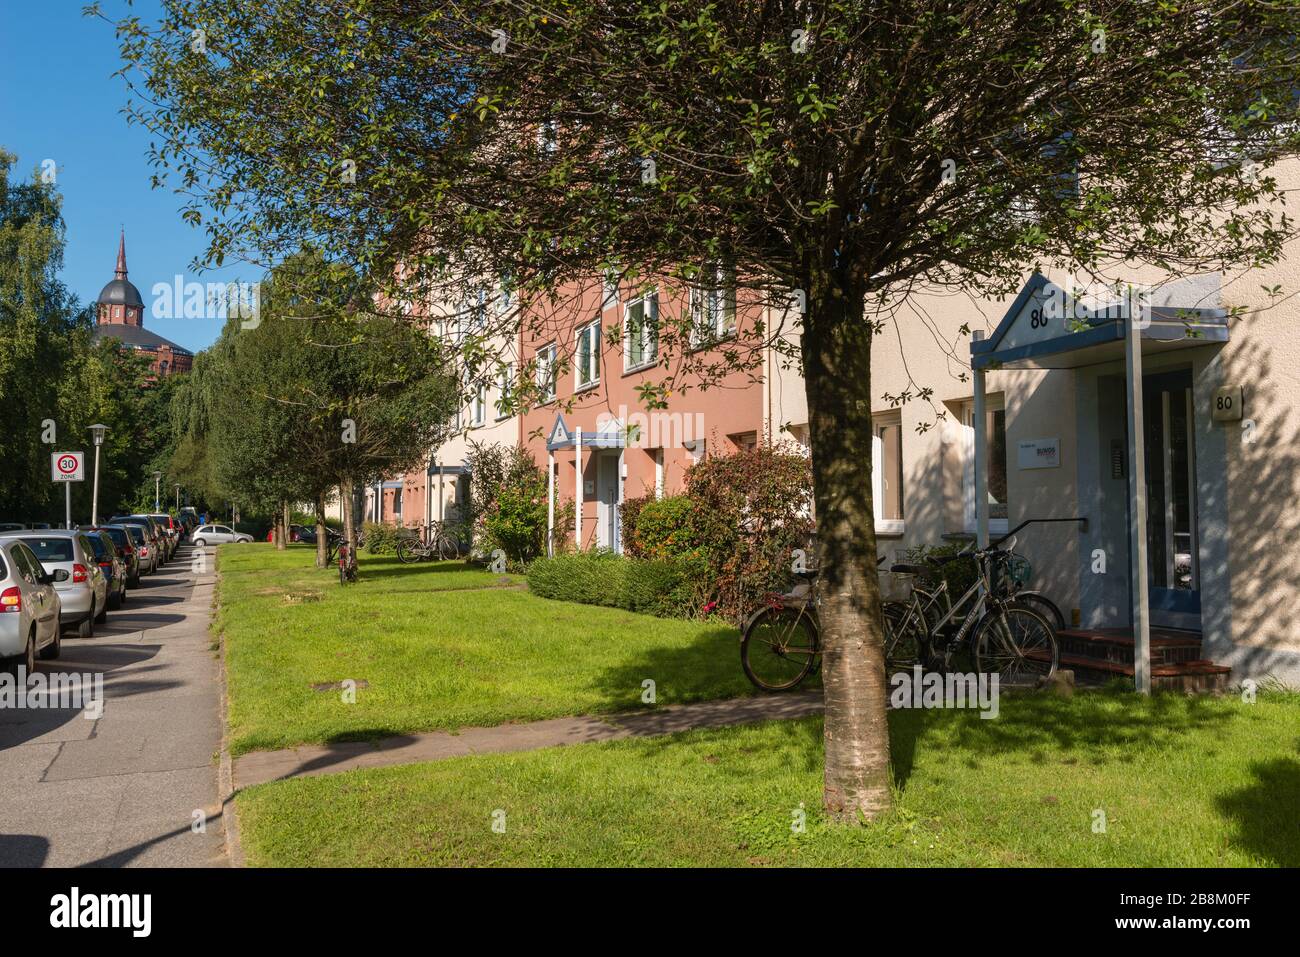 Residential Quarter in Kiel, capital city of Schleswig-Holstein, North Germany, Central Europe Stock Photo